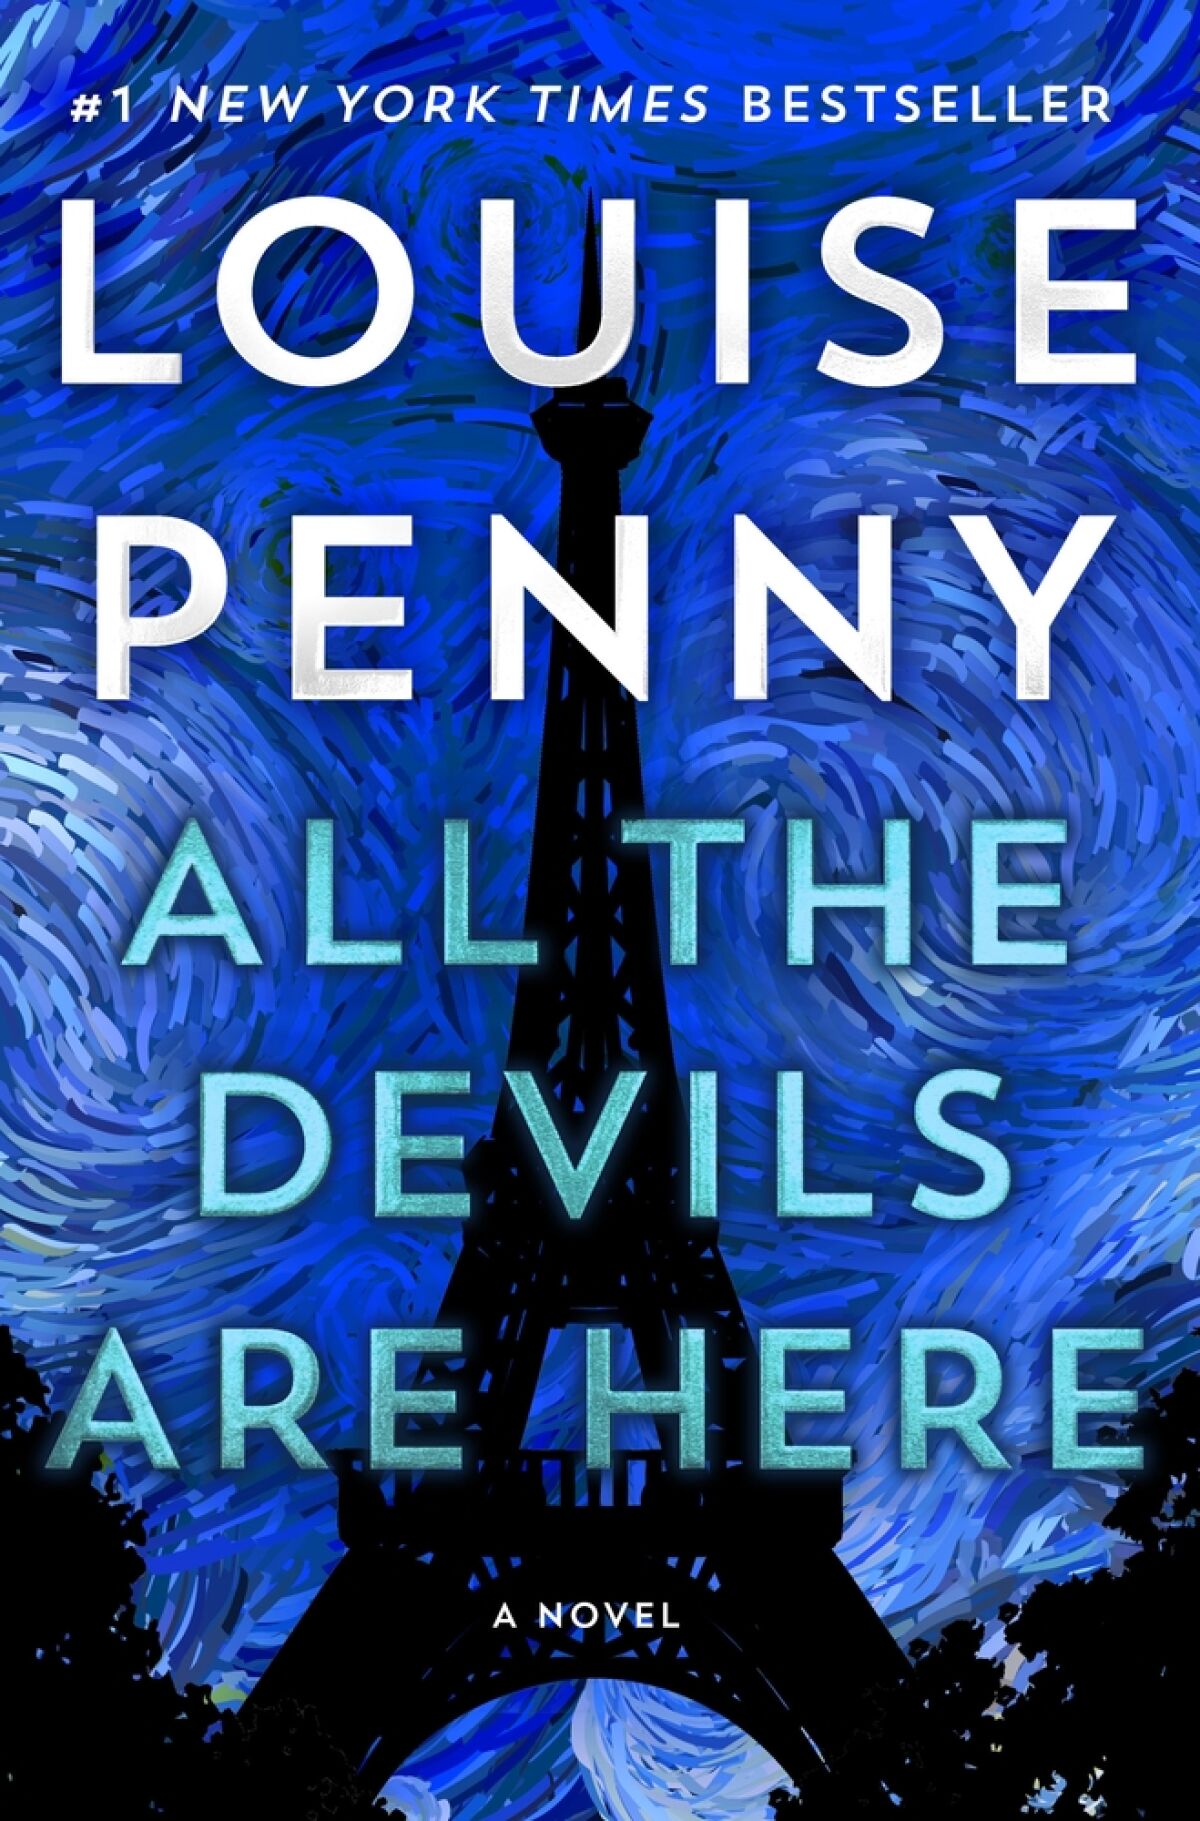 Book jacket for "All the Devils Are Here" by Louise Penny.